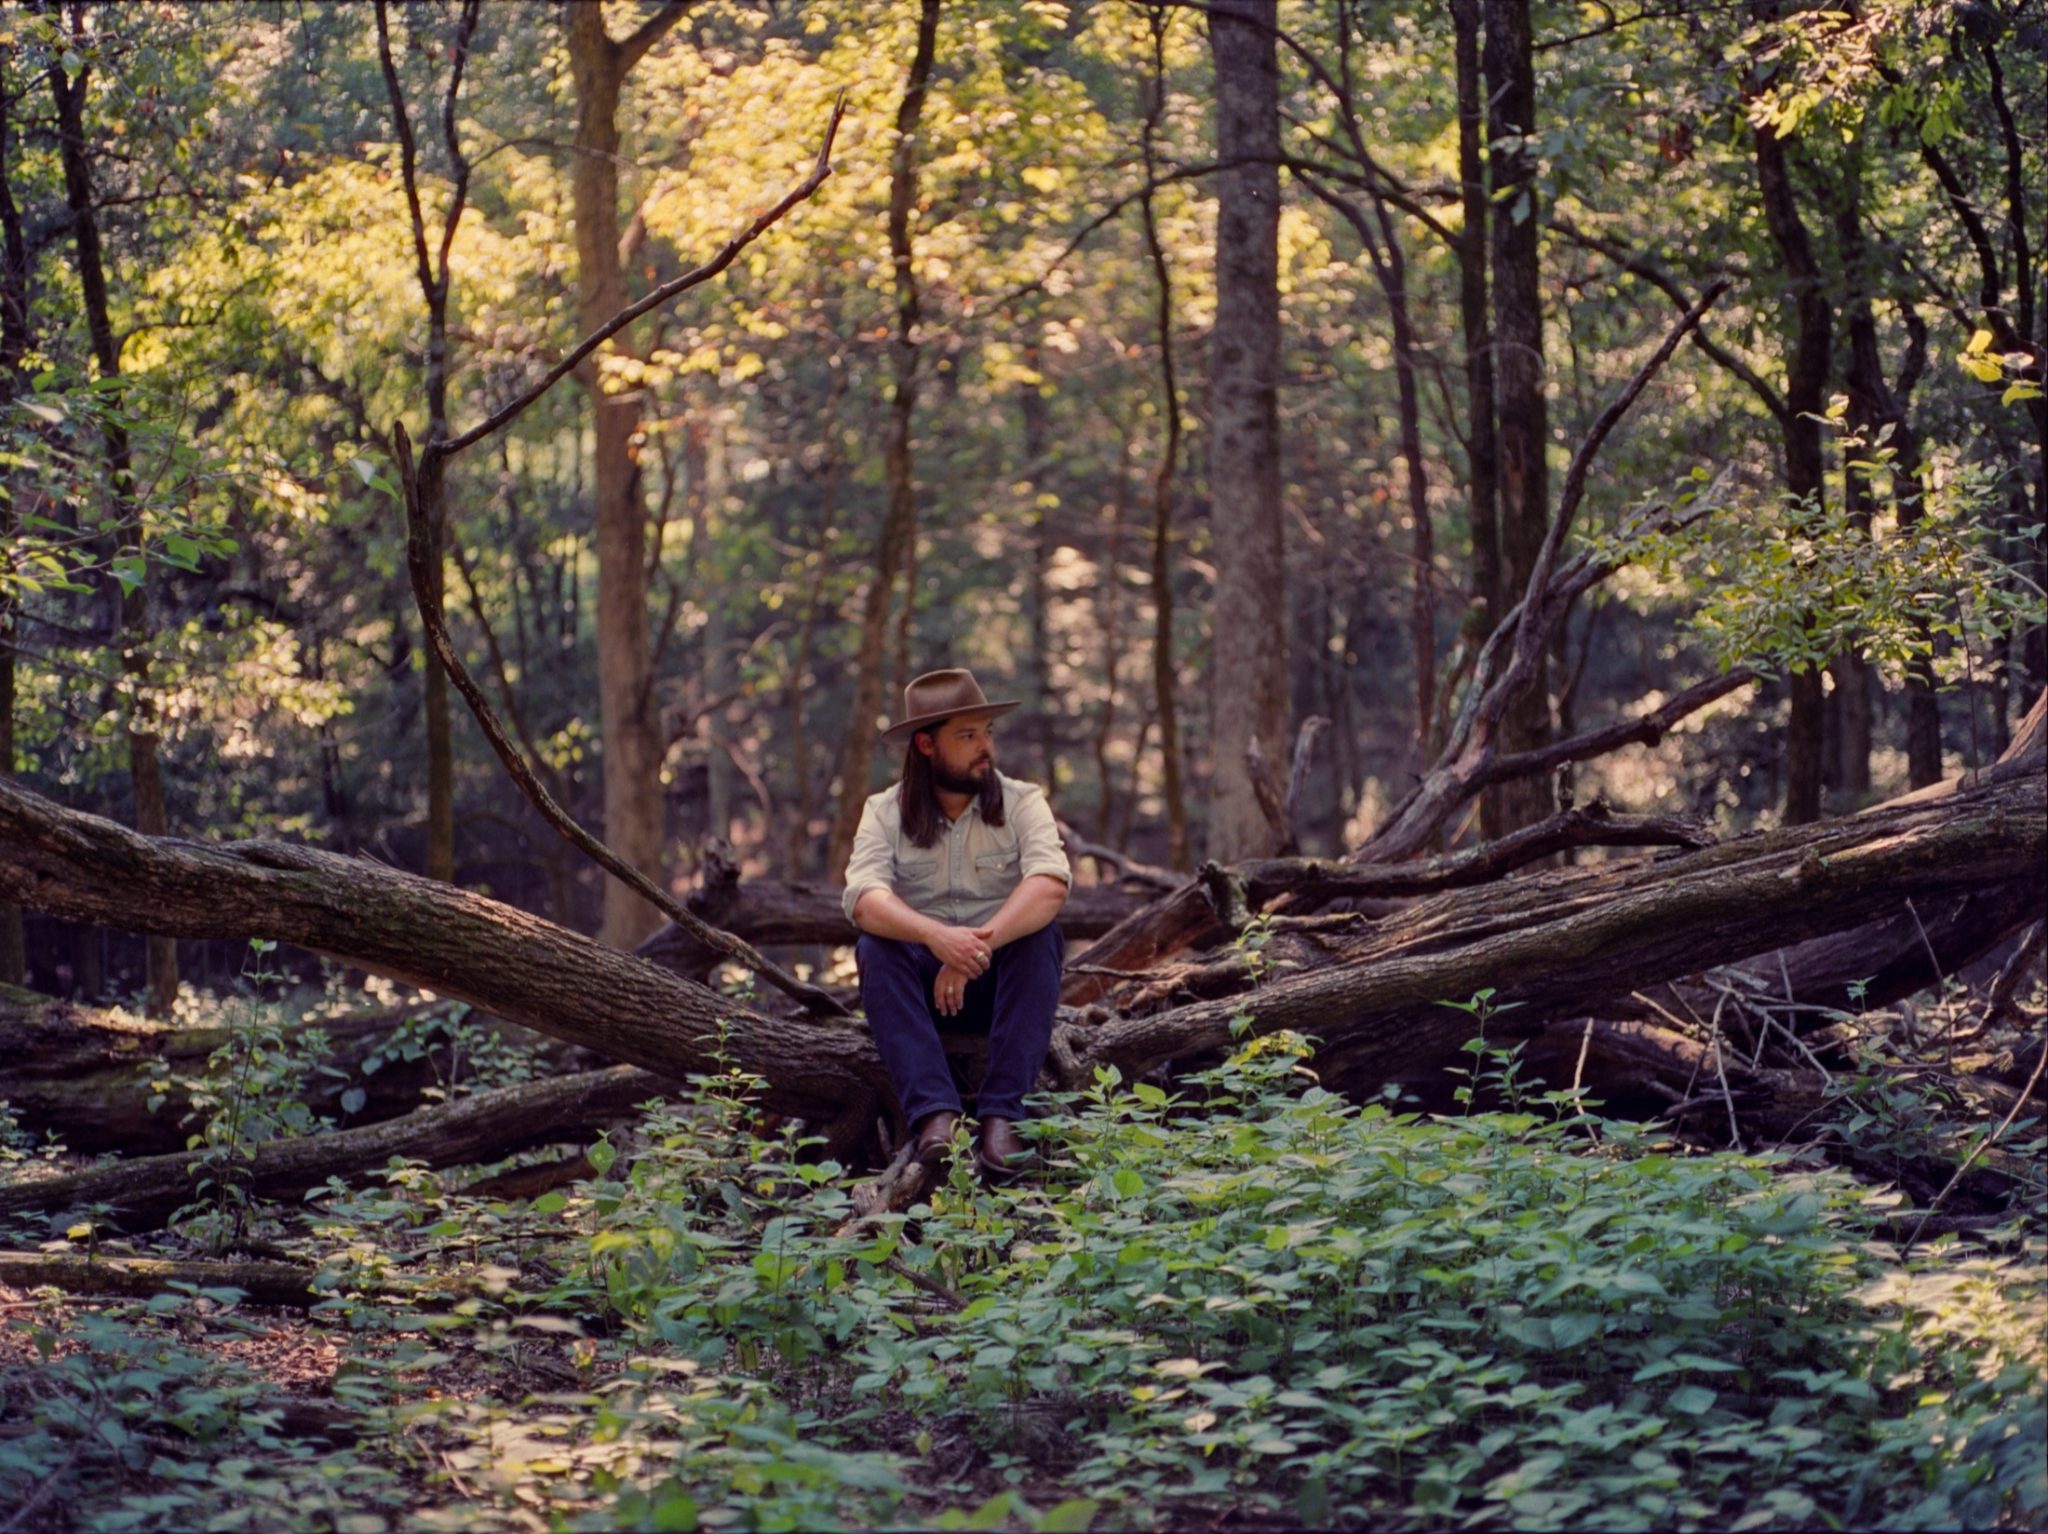 Caleb Caudle sits on a fallen log in sunlit woods